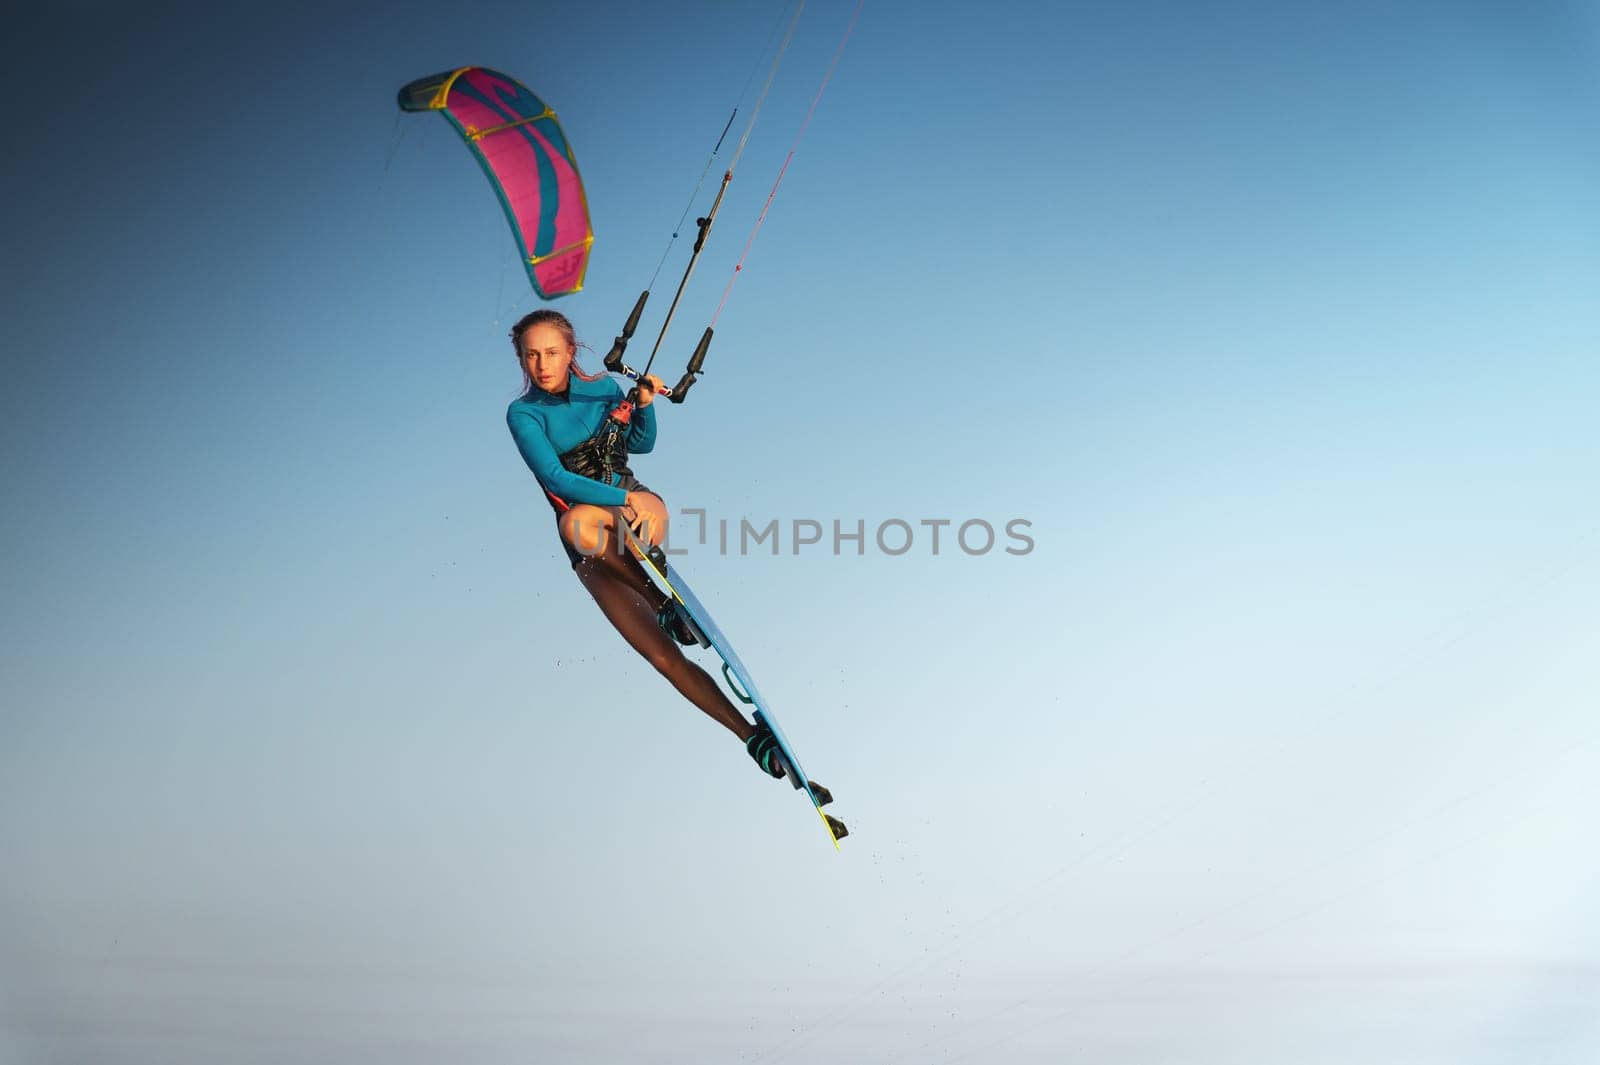 Caucasian woman kitesurfer athlete doing a trick in the air against a blue sky without a cloud. Professional kitesurfing training by yanik88